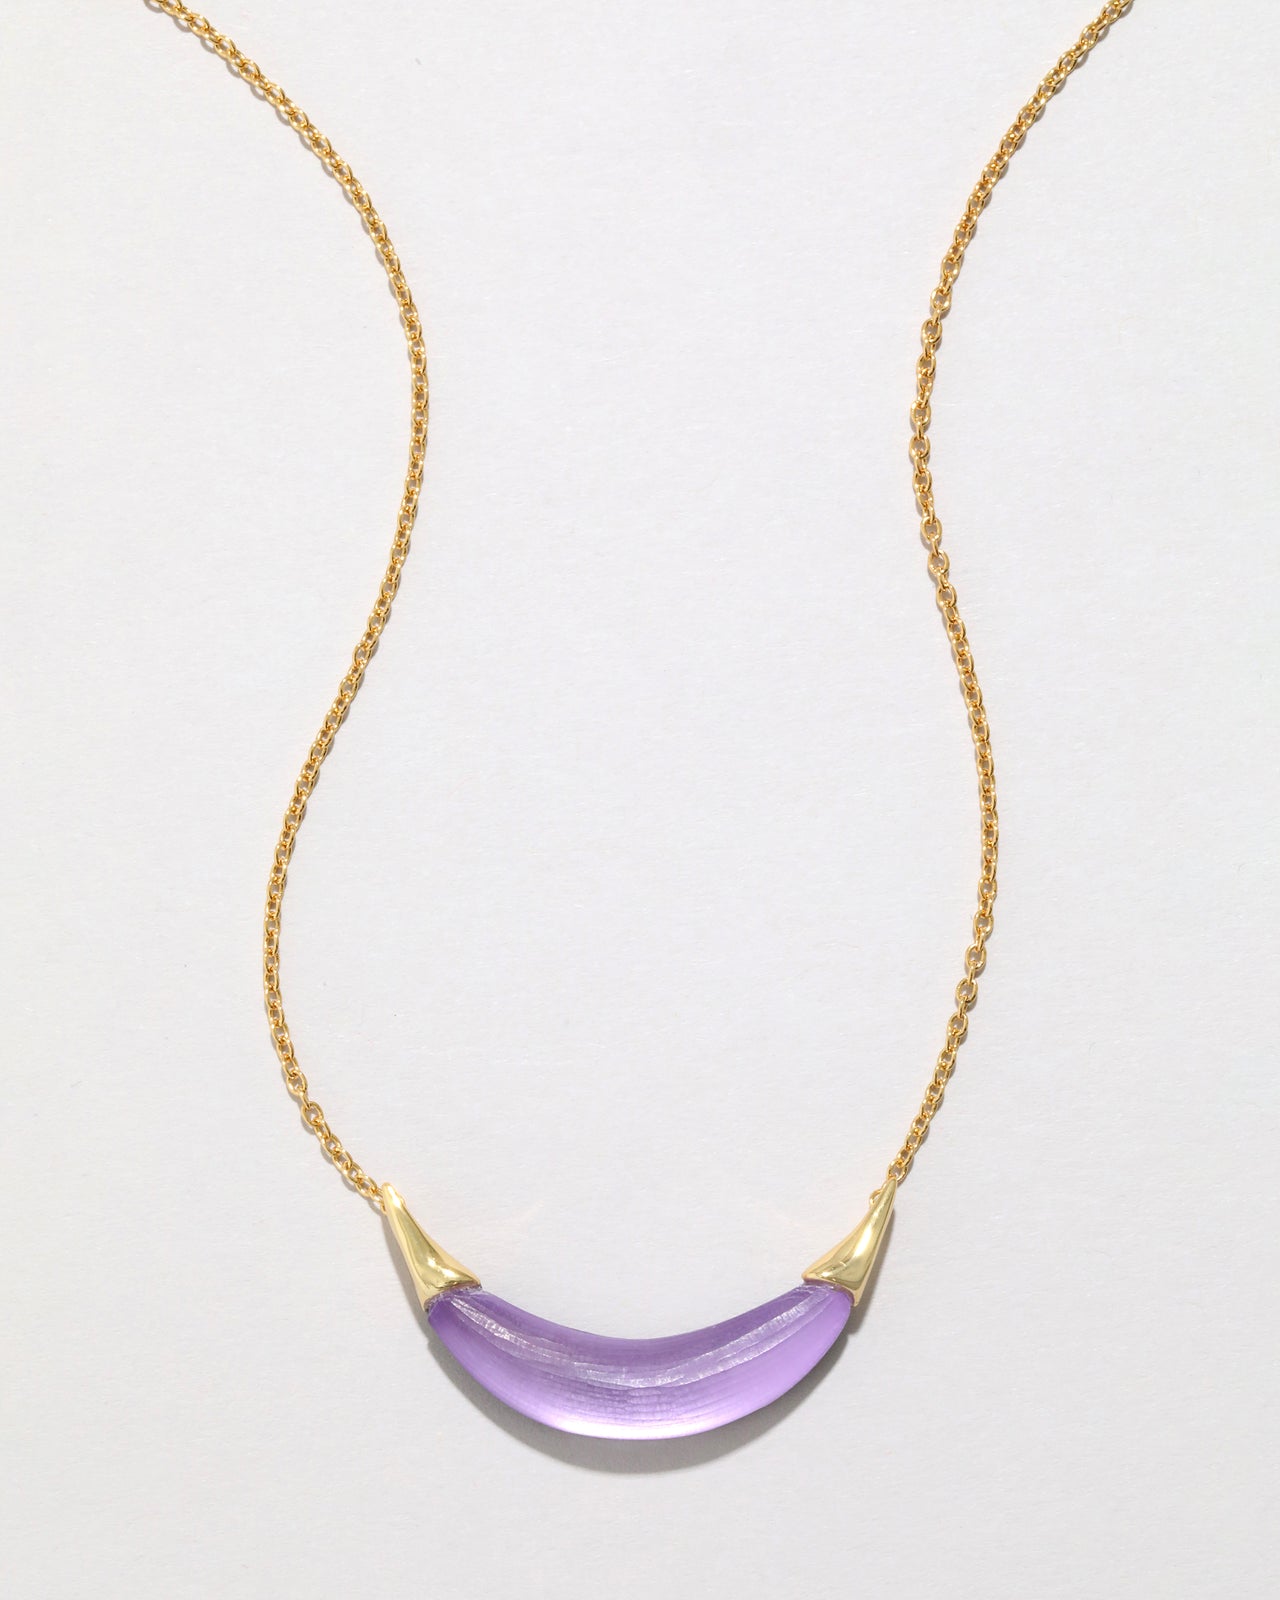 Gold Capped Crescent Lucite Necklace- Amethyst - Photo 2